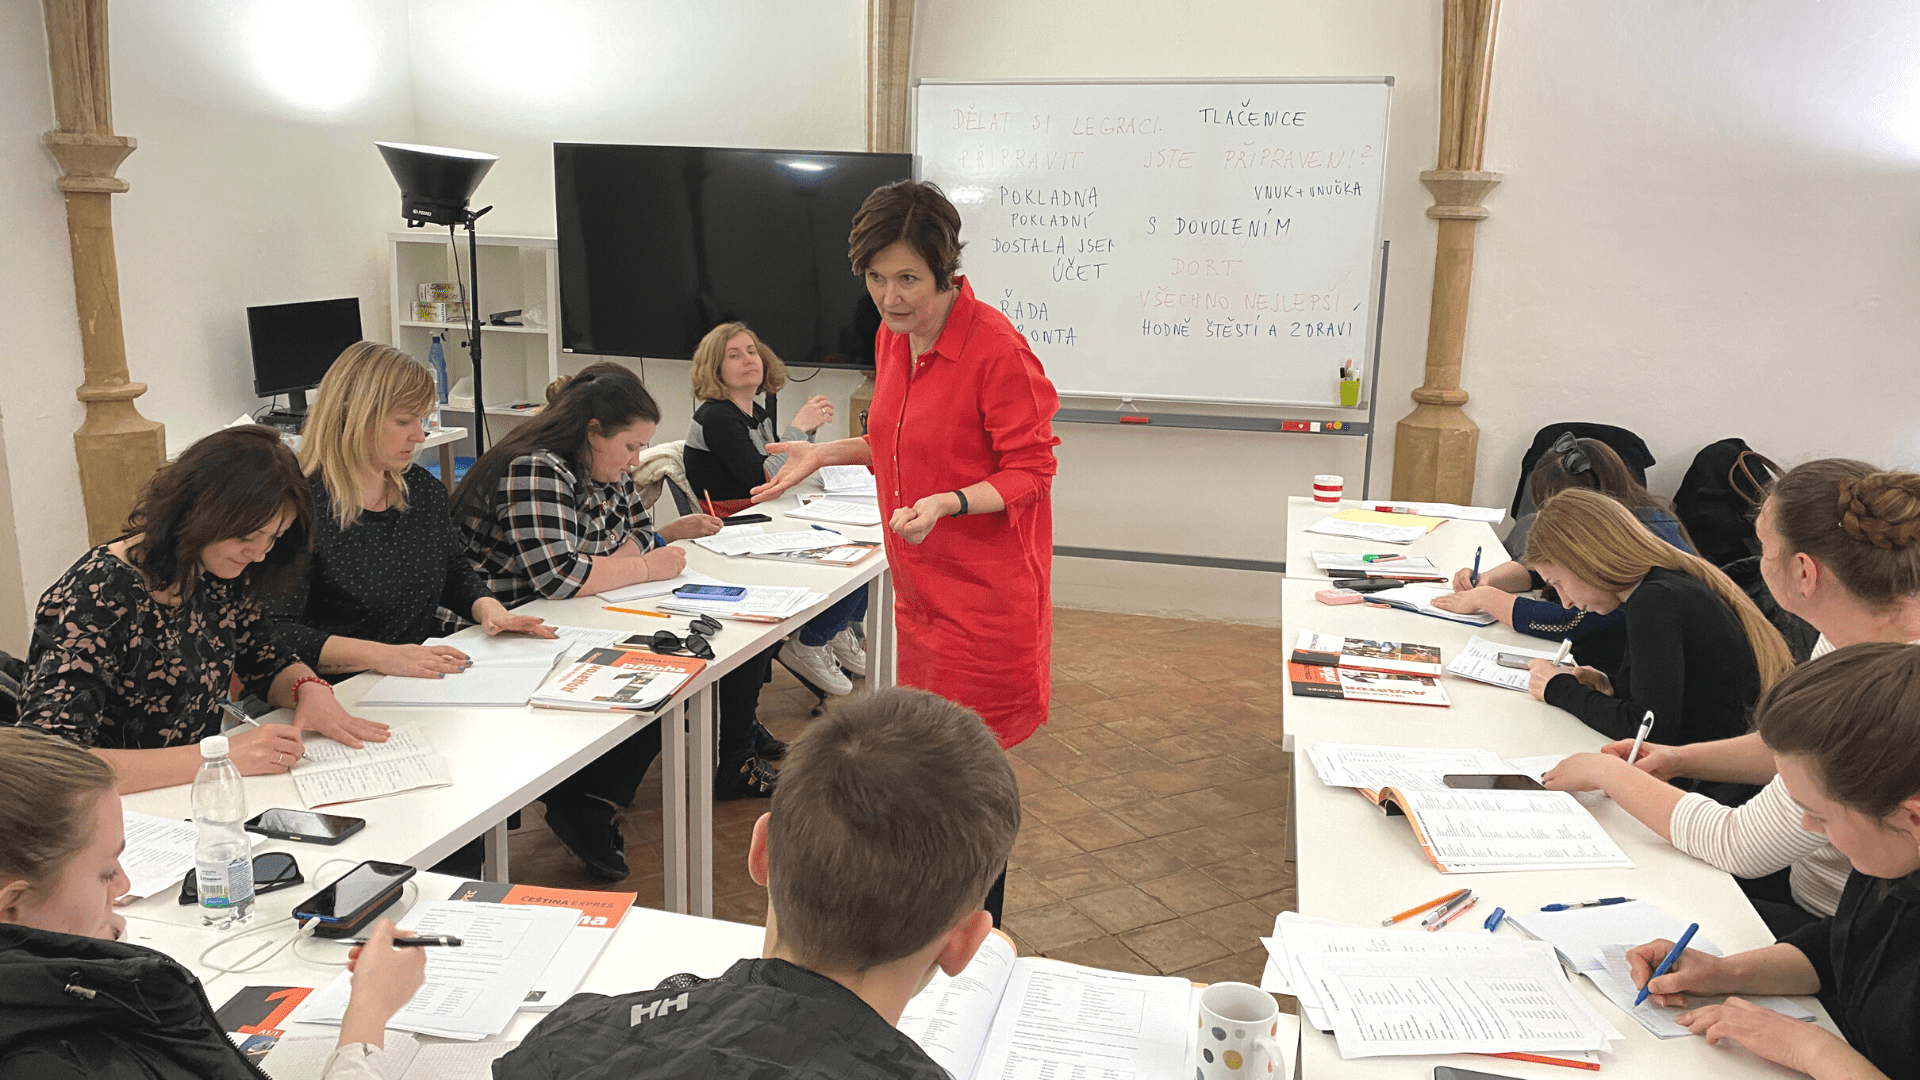 An instructor teaching with students around her taking notes